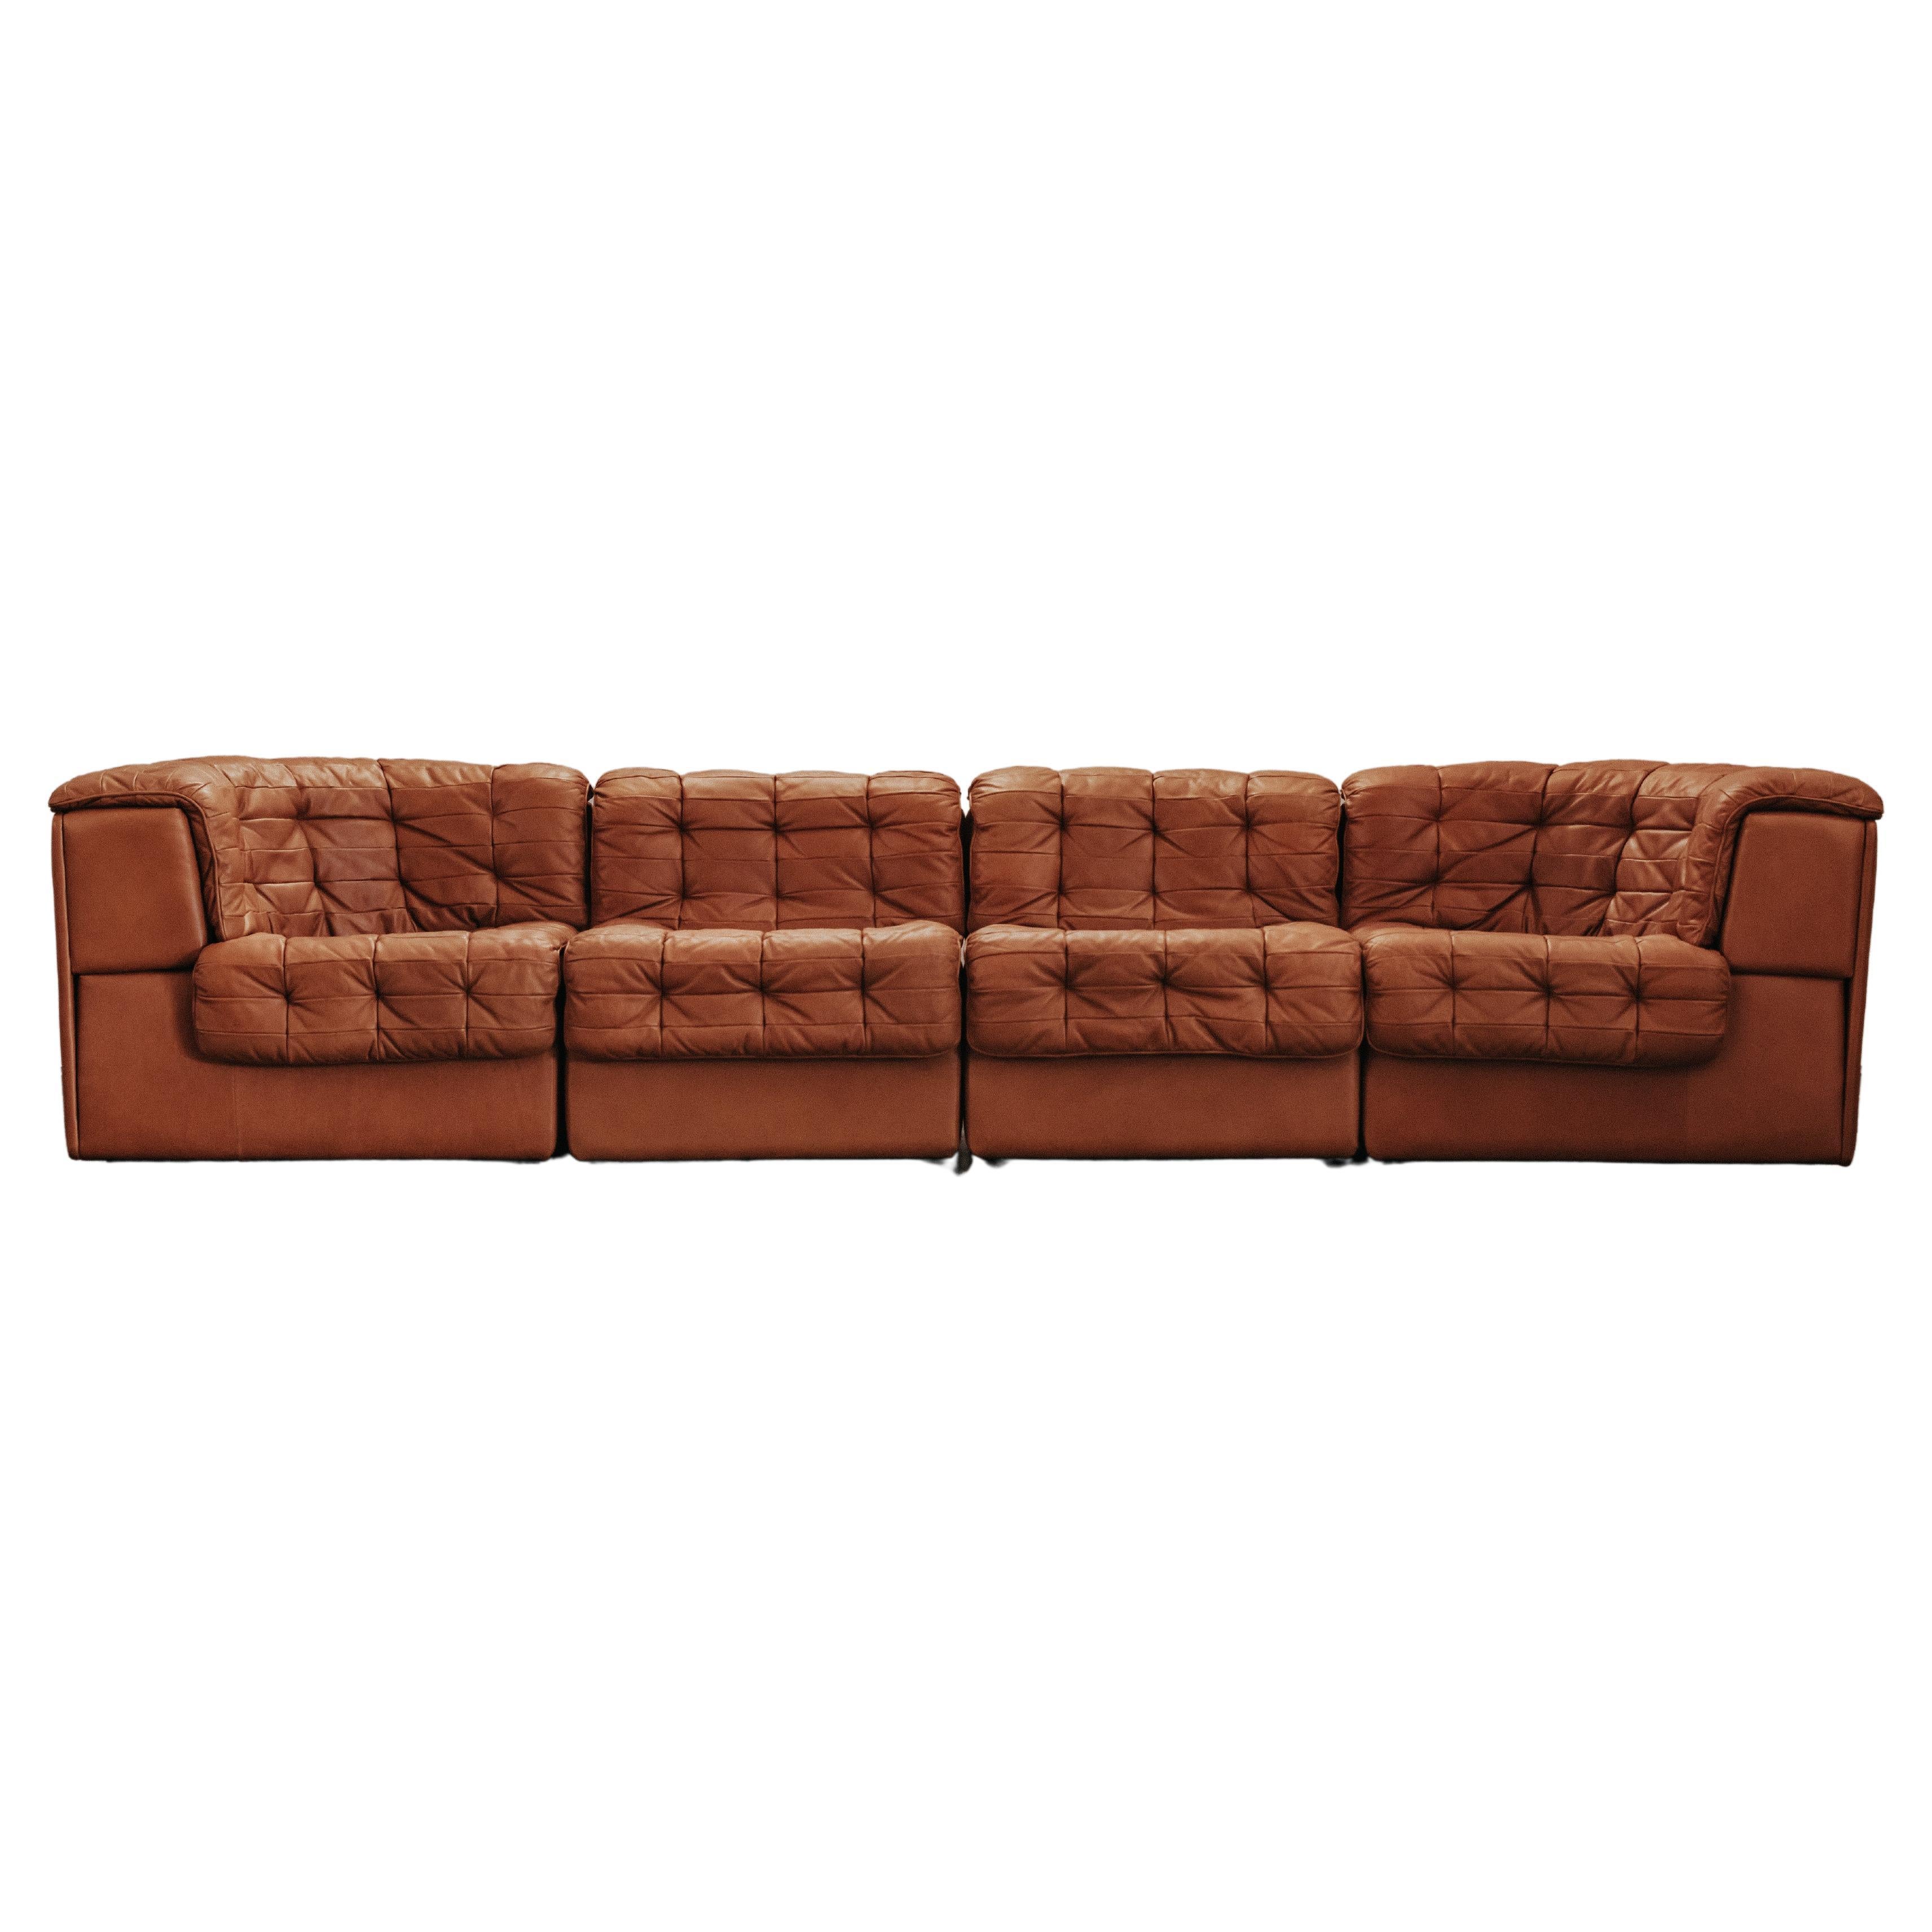 Vintage De Sede DS11 Sofa In Cognac Leather, From Switzerland, Circa 1970 For Sale